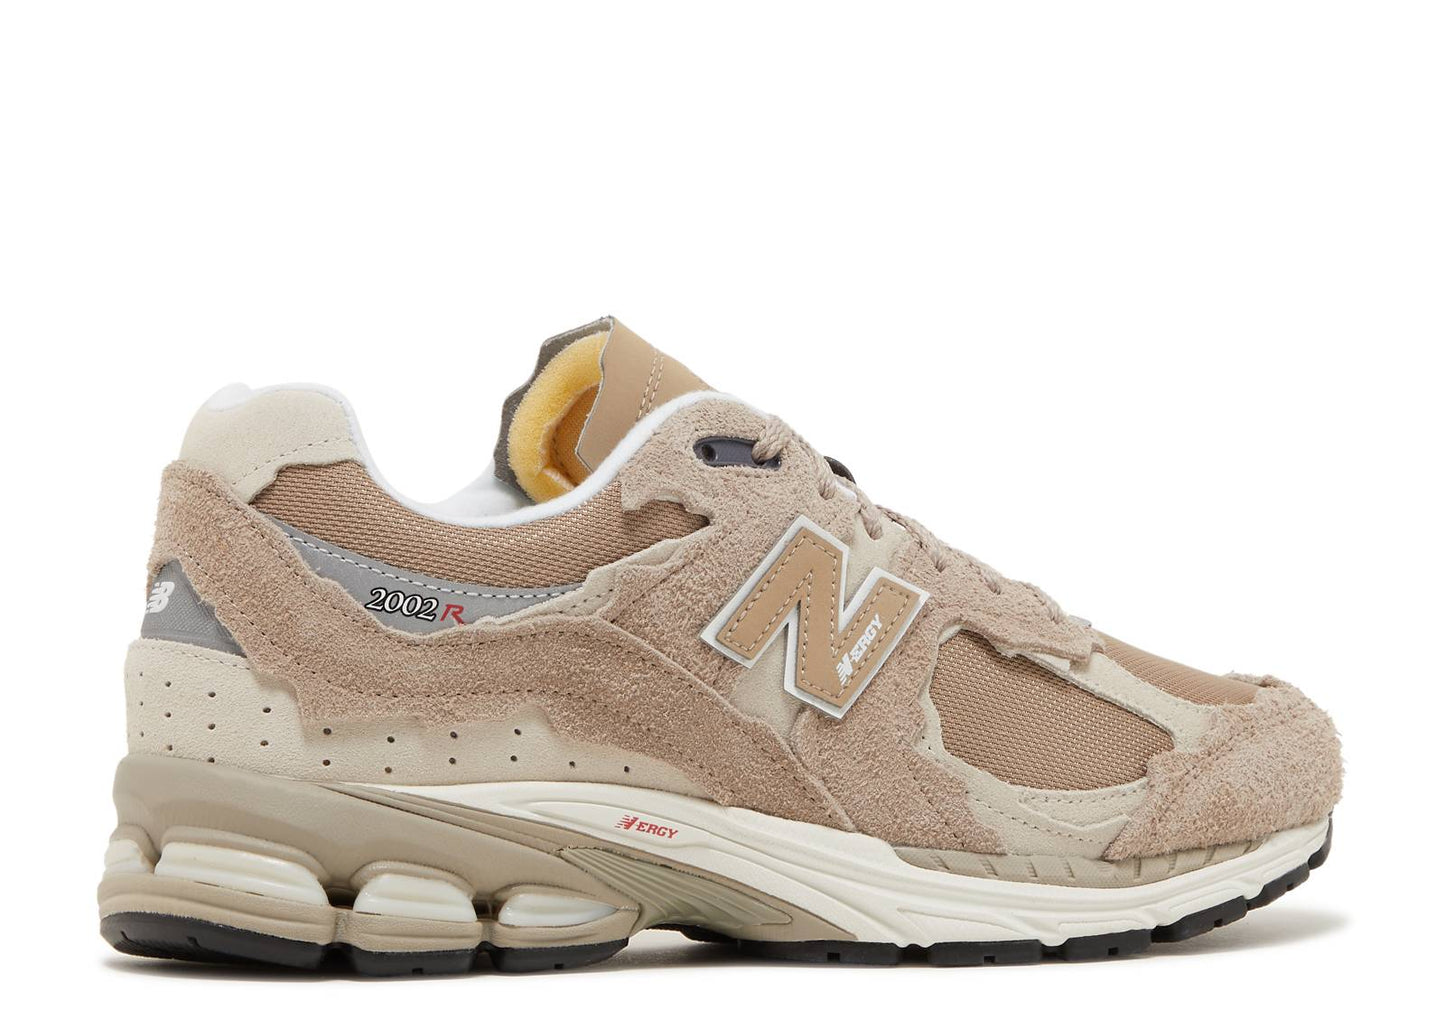 New Balance 2002R Protection Pack "Driftwood"